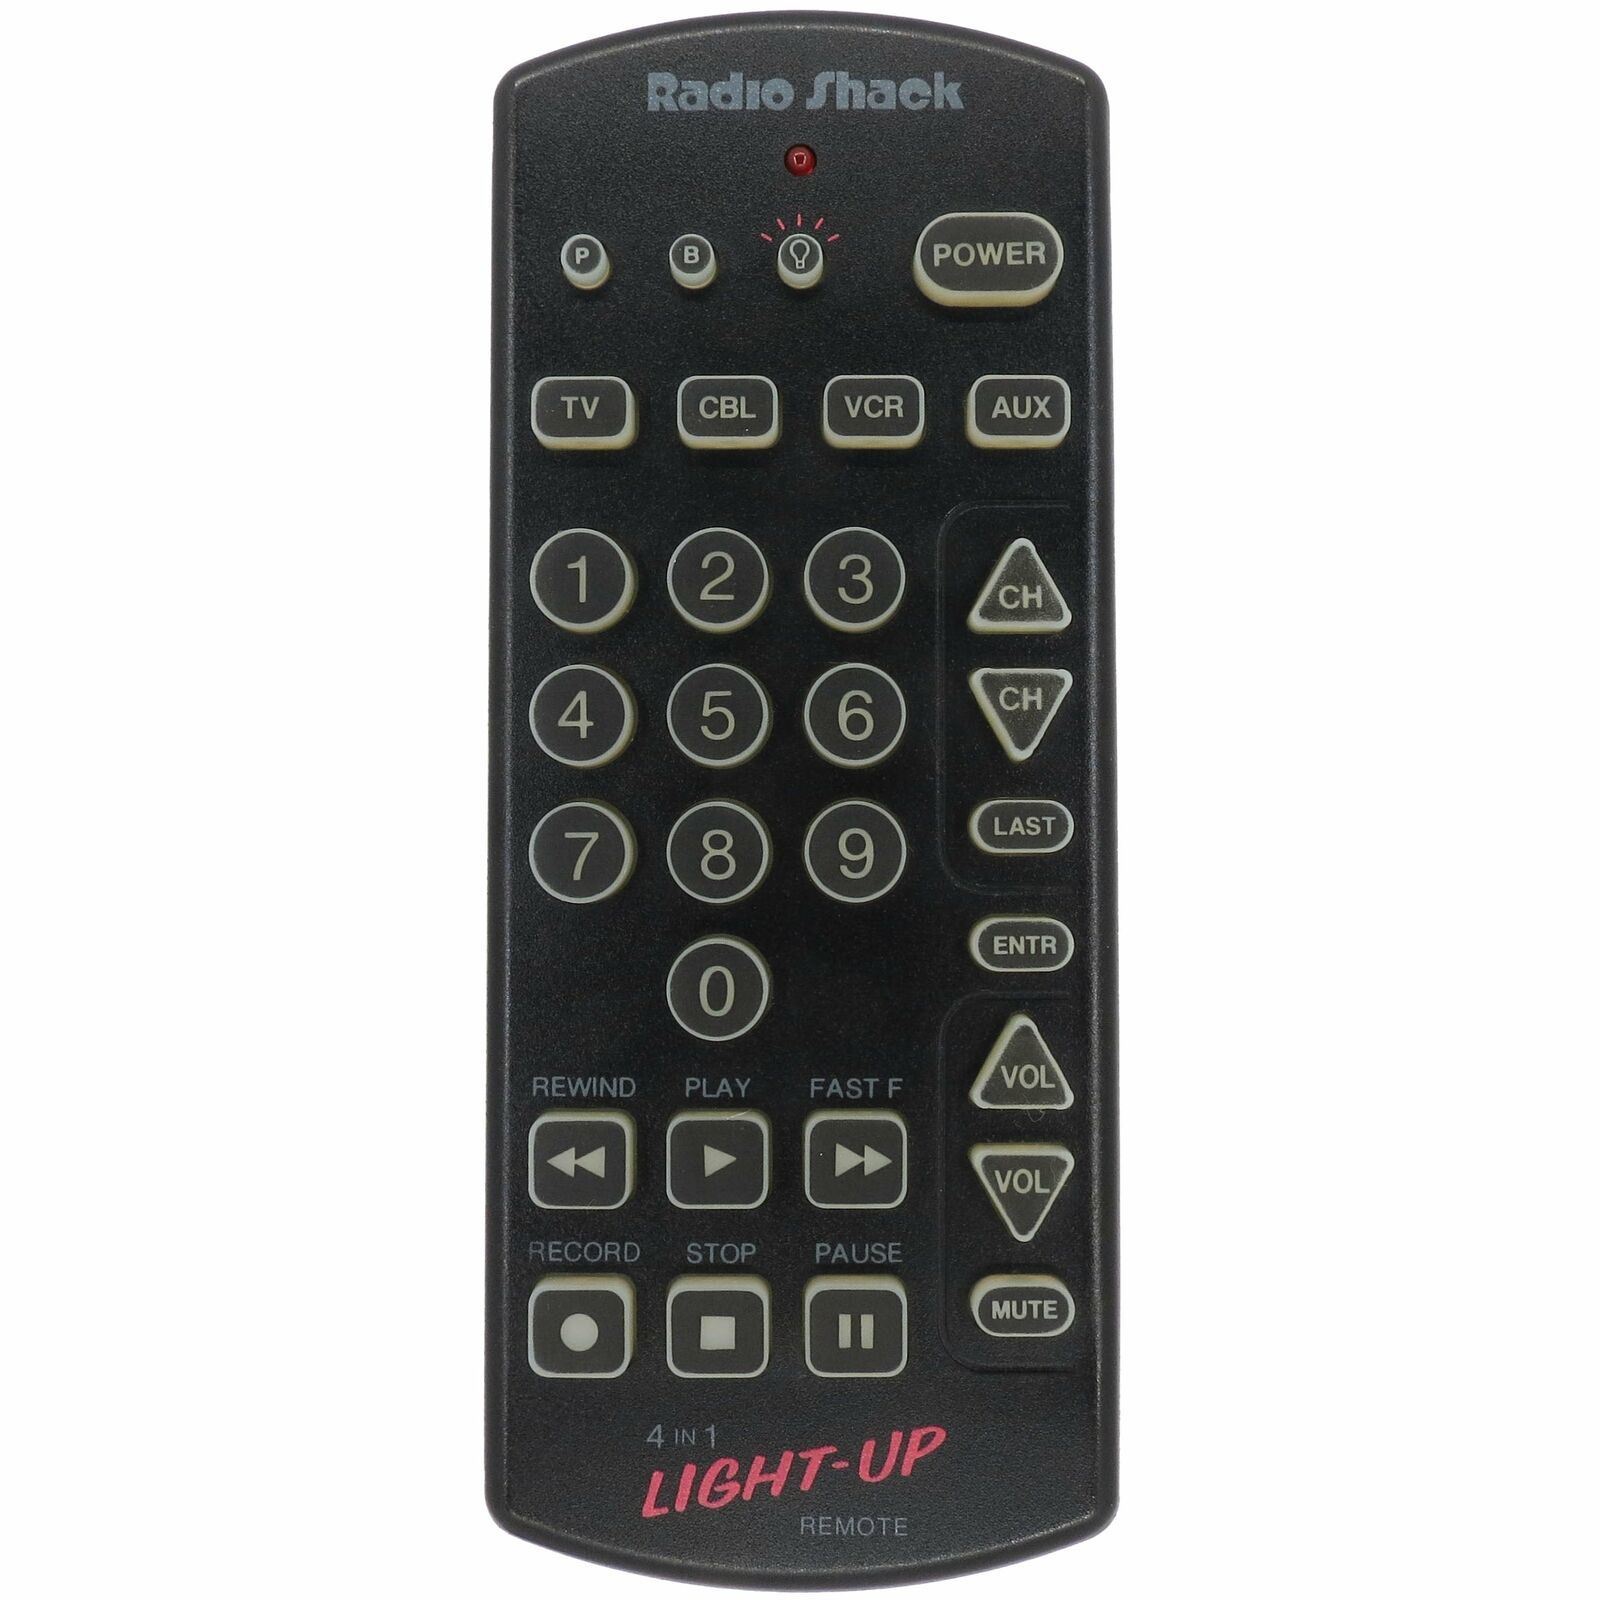 Radio Shack 15-1911 Light-Up 4 Device Universal Remote For TV, CBL, VCR, AUX - $7.89